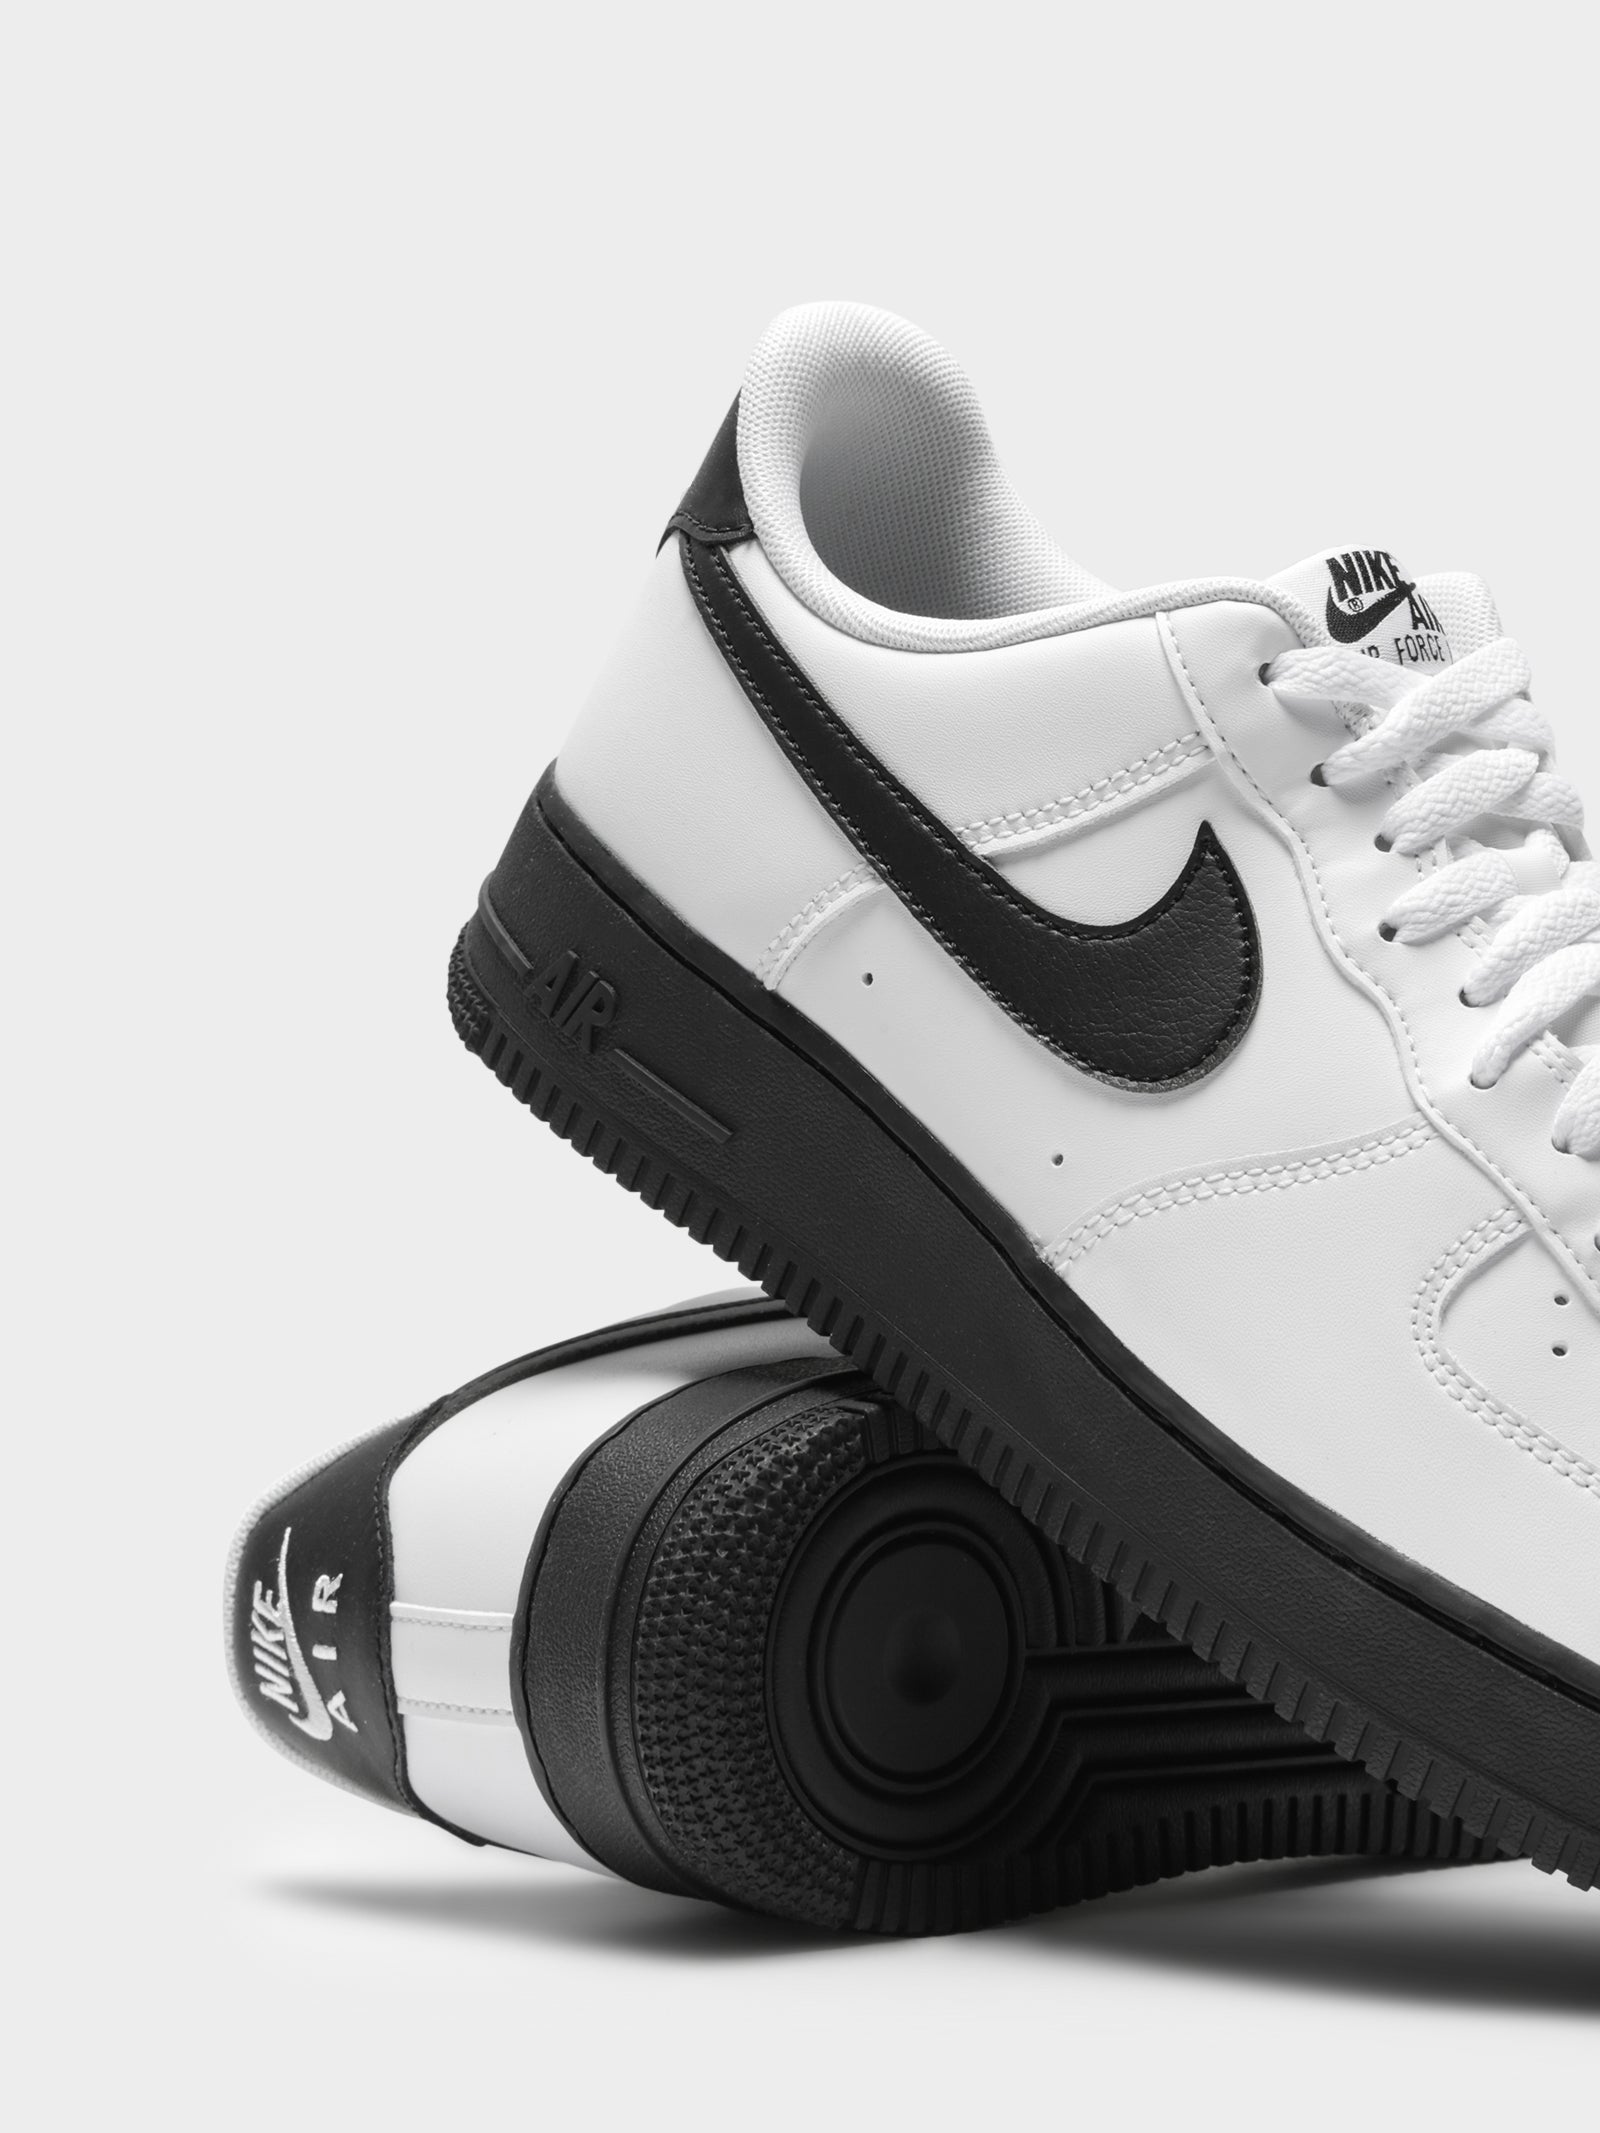 Unisex Air Force 1 '07 Sneakers in White & Black